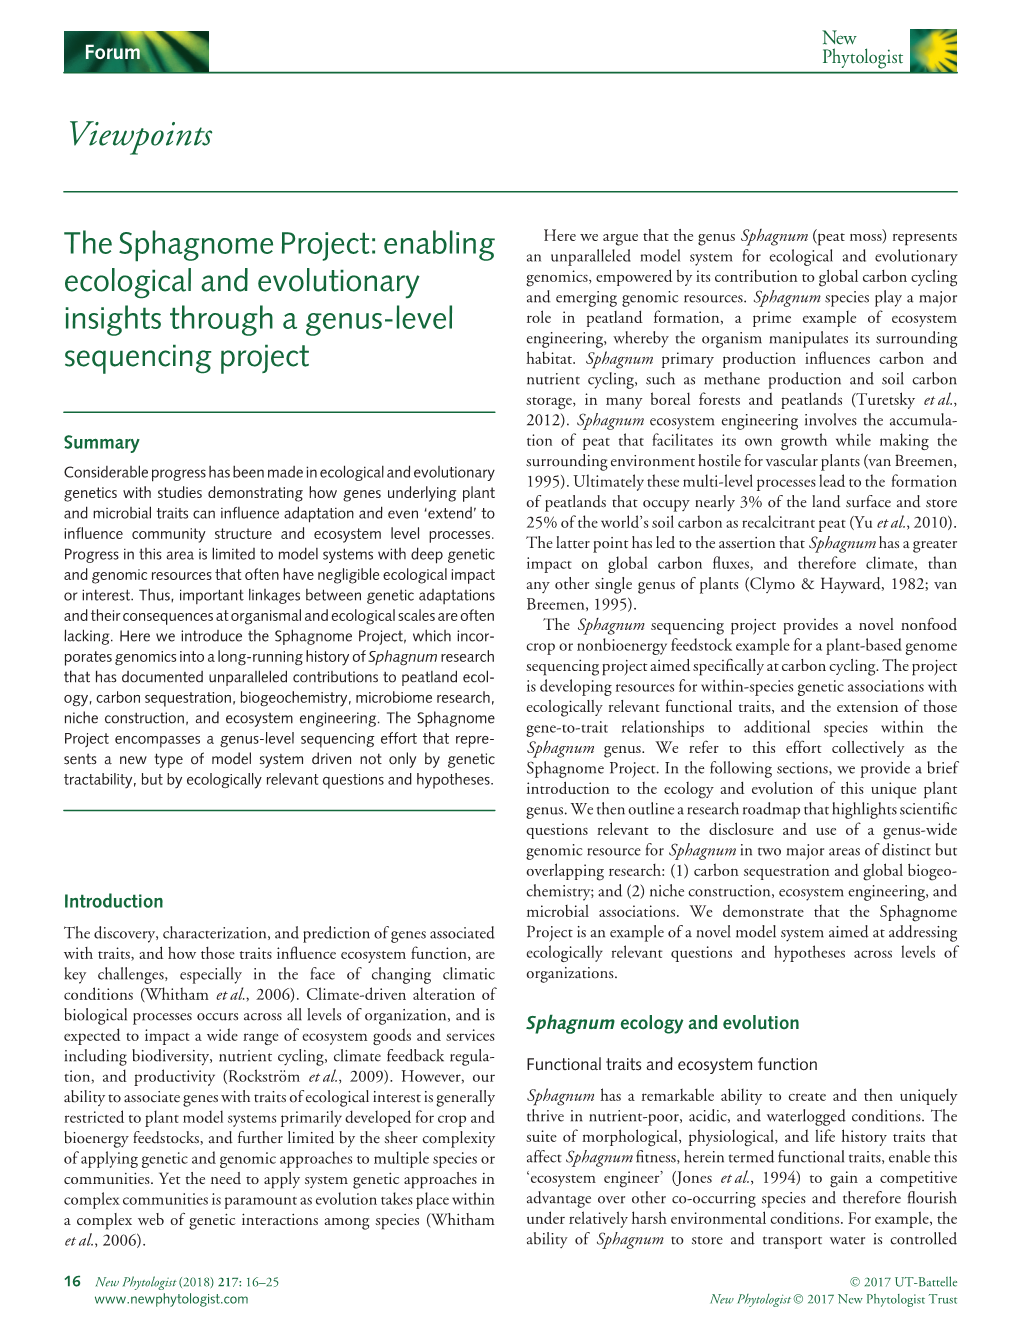 The Sphagnome Project: Enabling Ecological and Evolutionary Insights